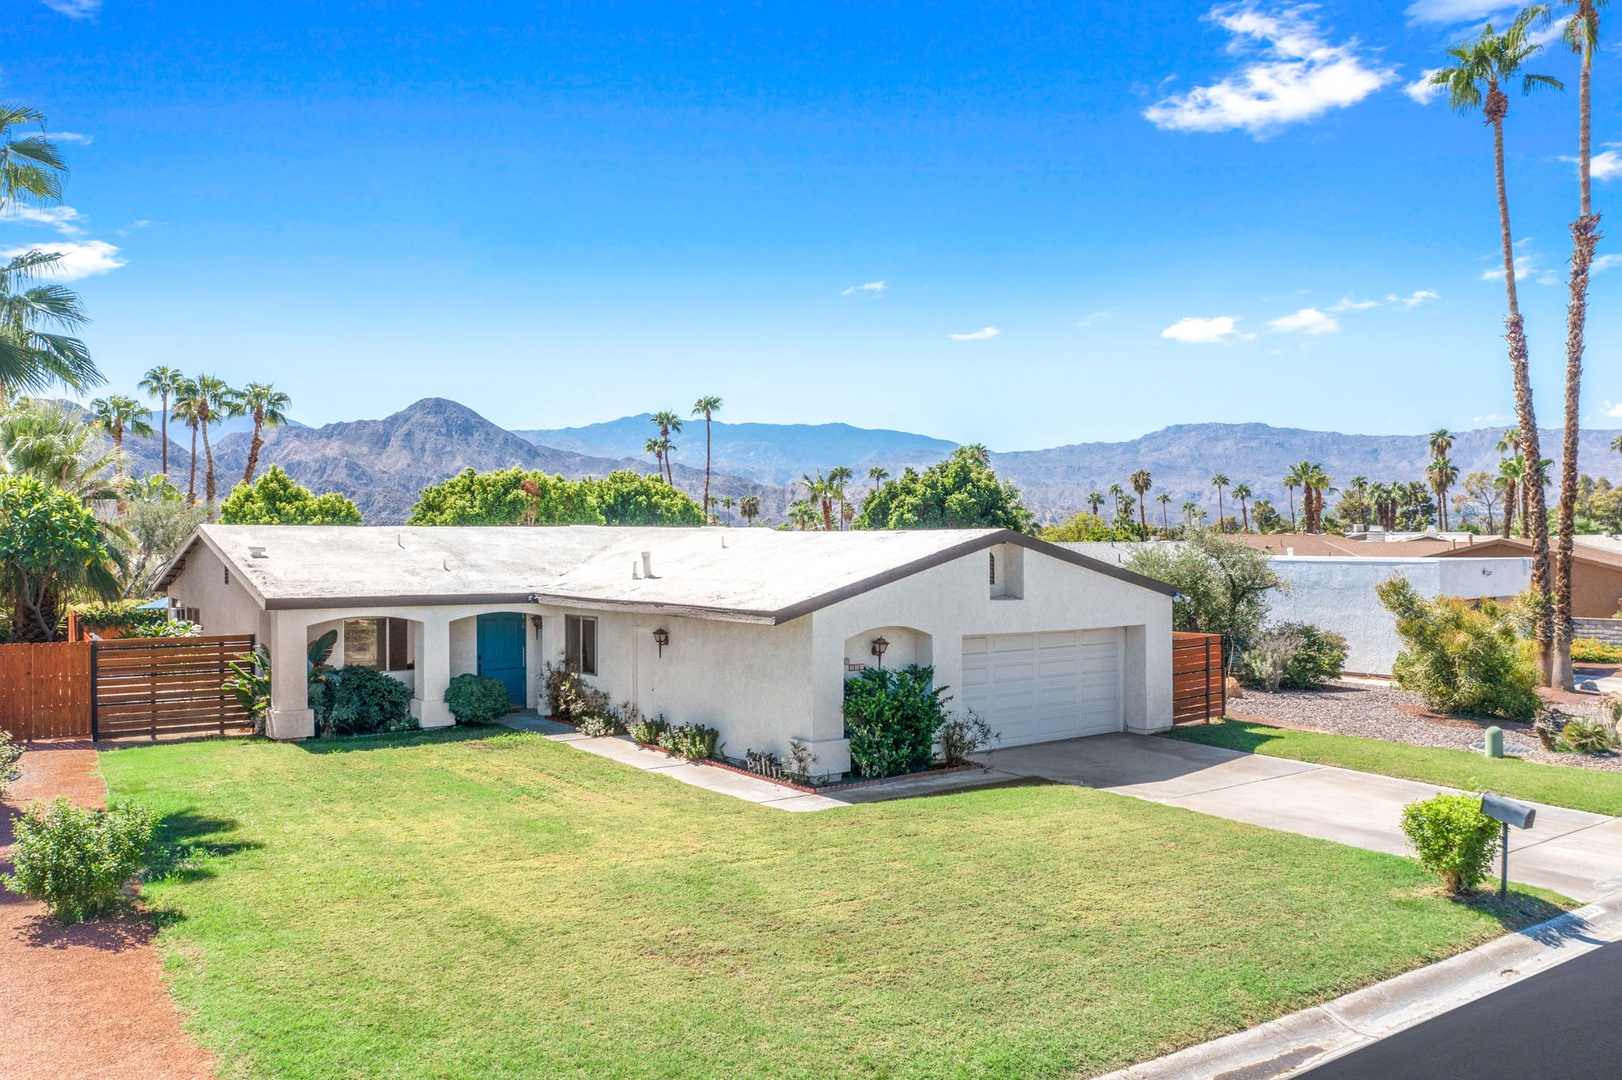 Welcome to Palm Desert Vacation Rental!